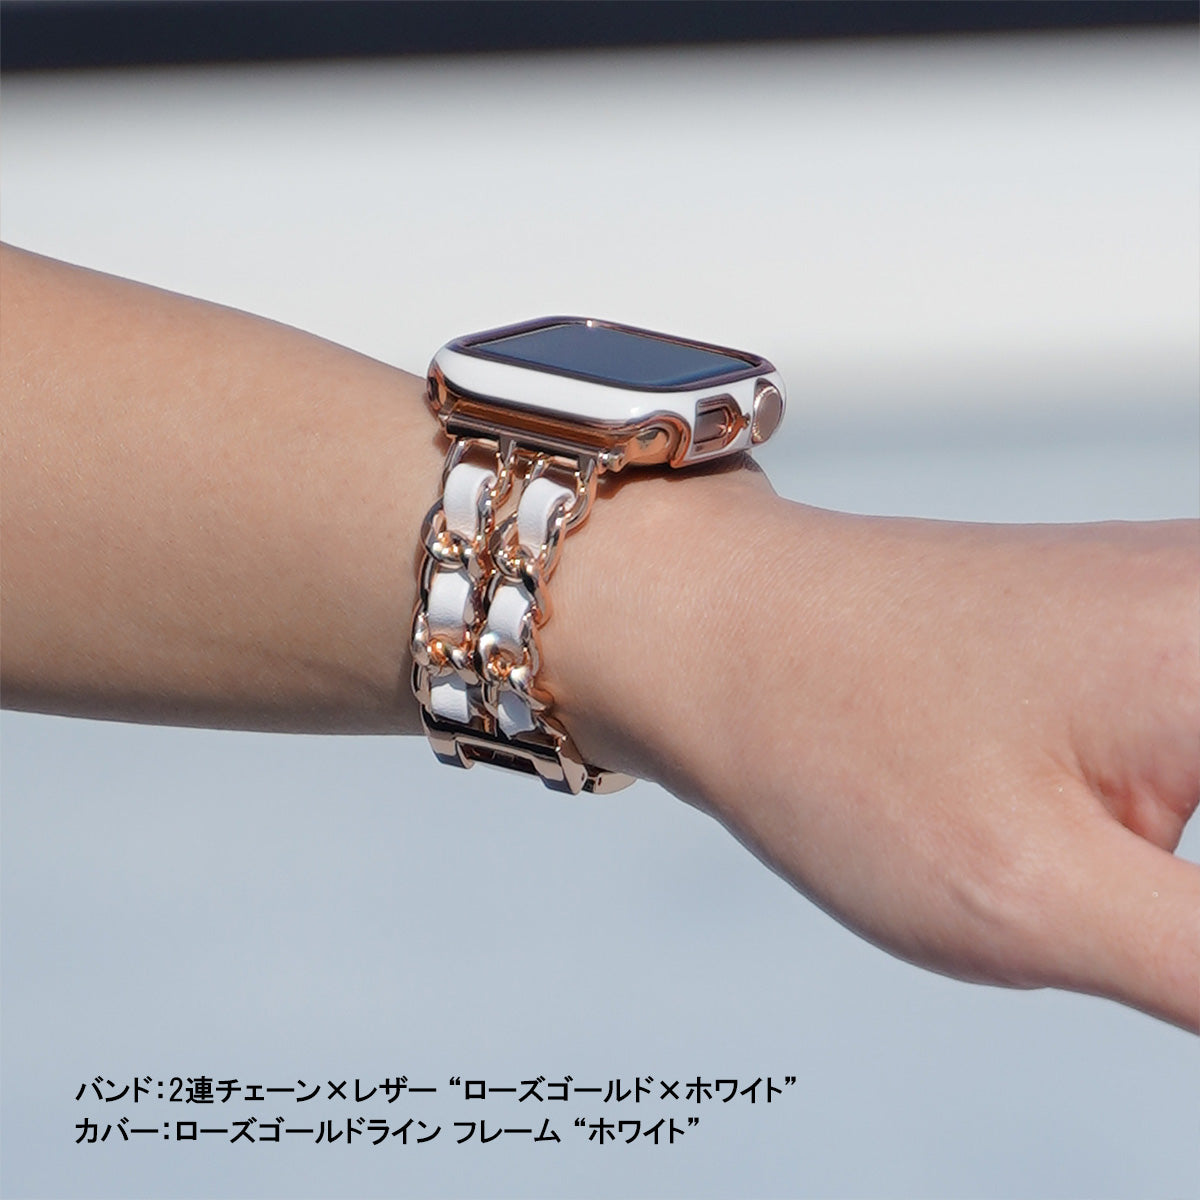 Double Chain x Leather Silver Rose Gold Apple Watch Band Apple Watch